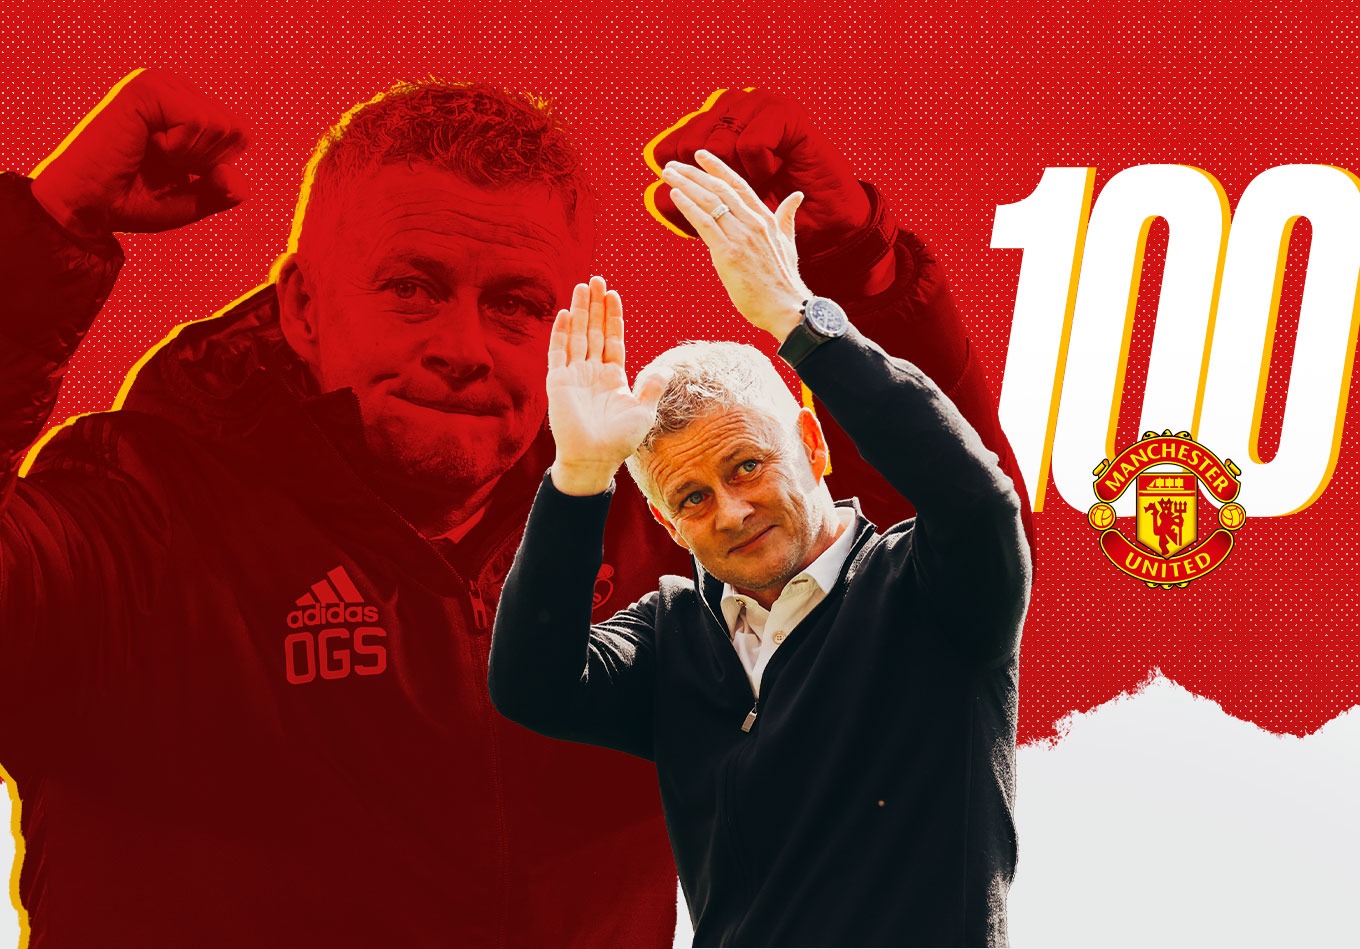 100 up for Solskjær in the Premier League: Too Early to Judge?